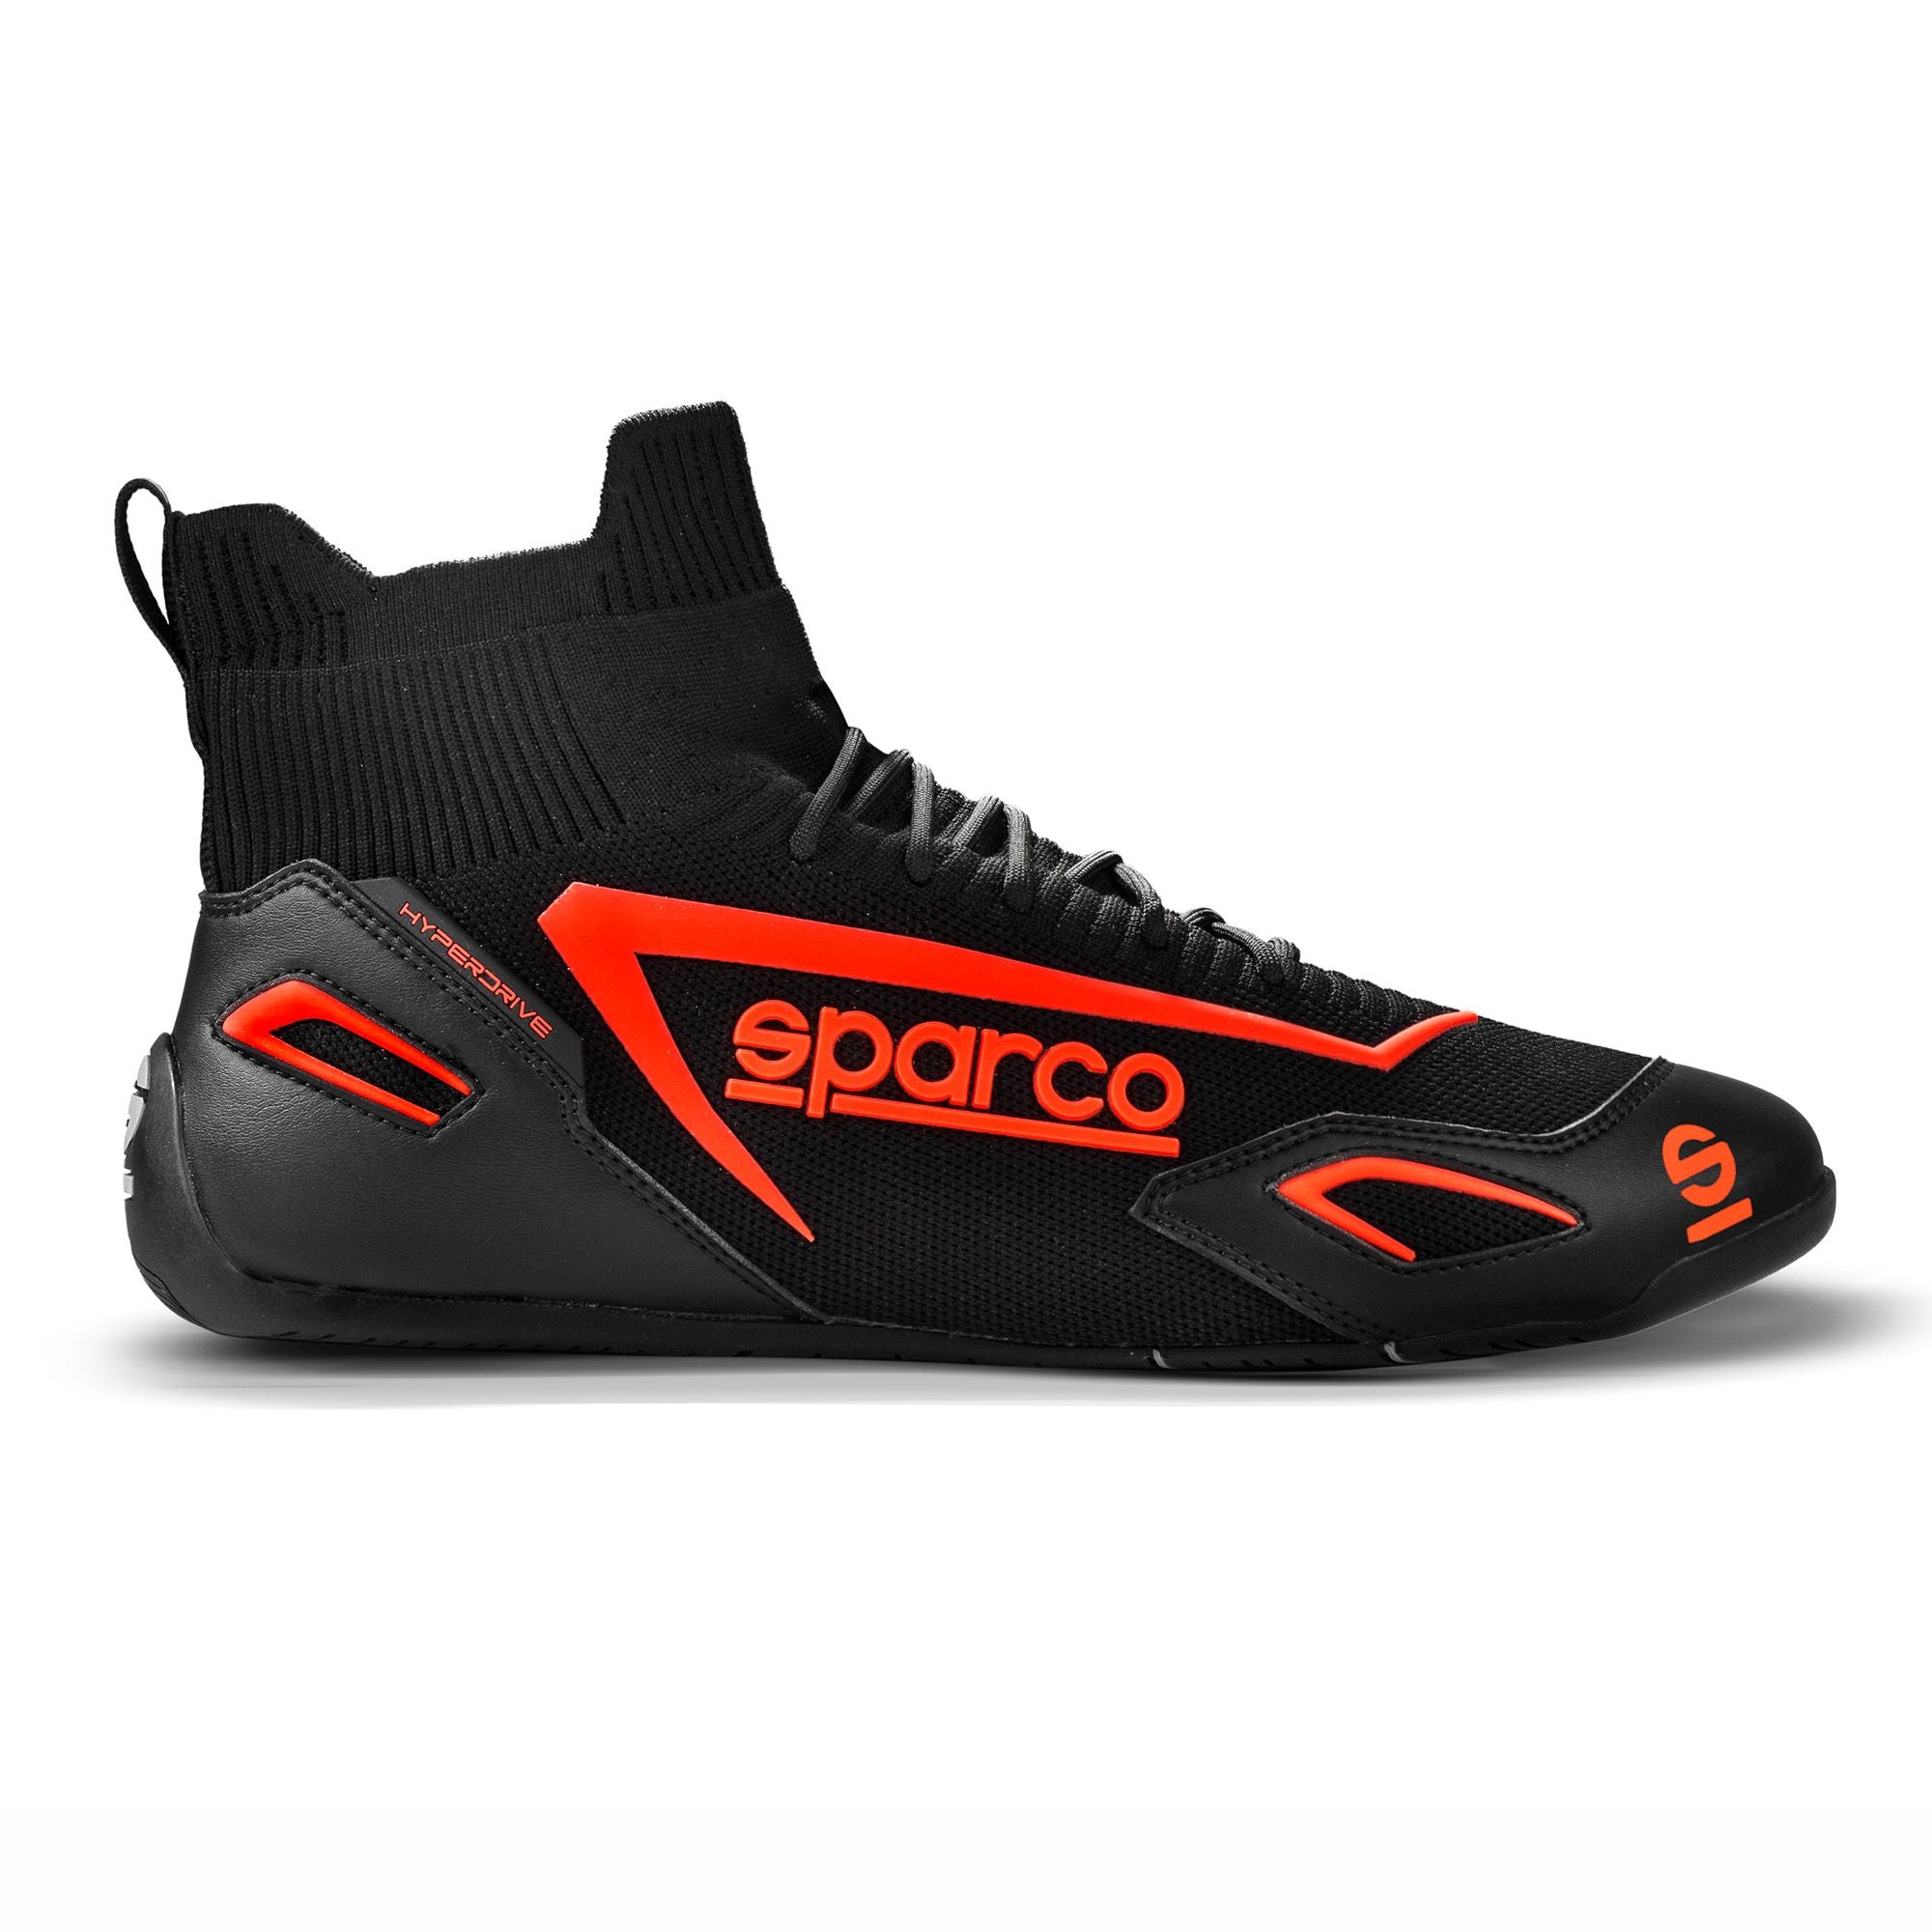 SPARCO 00129346NRRS Gaming sim racing shoes HYPERDRIVE, black/red, size 46 Photo-2 